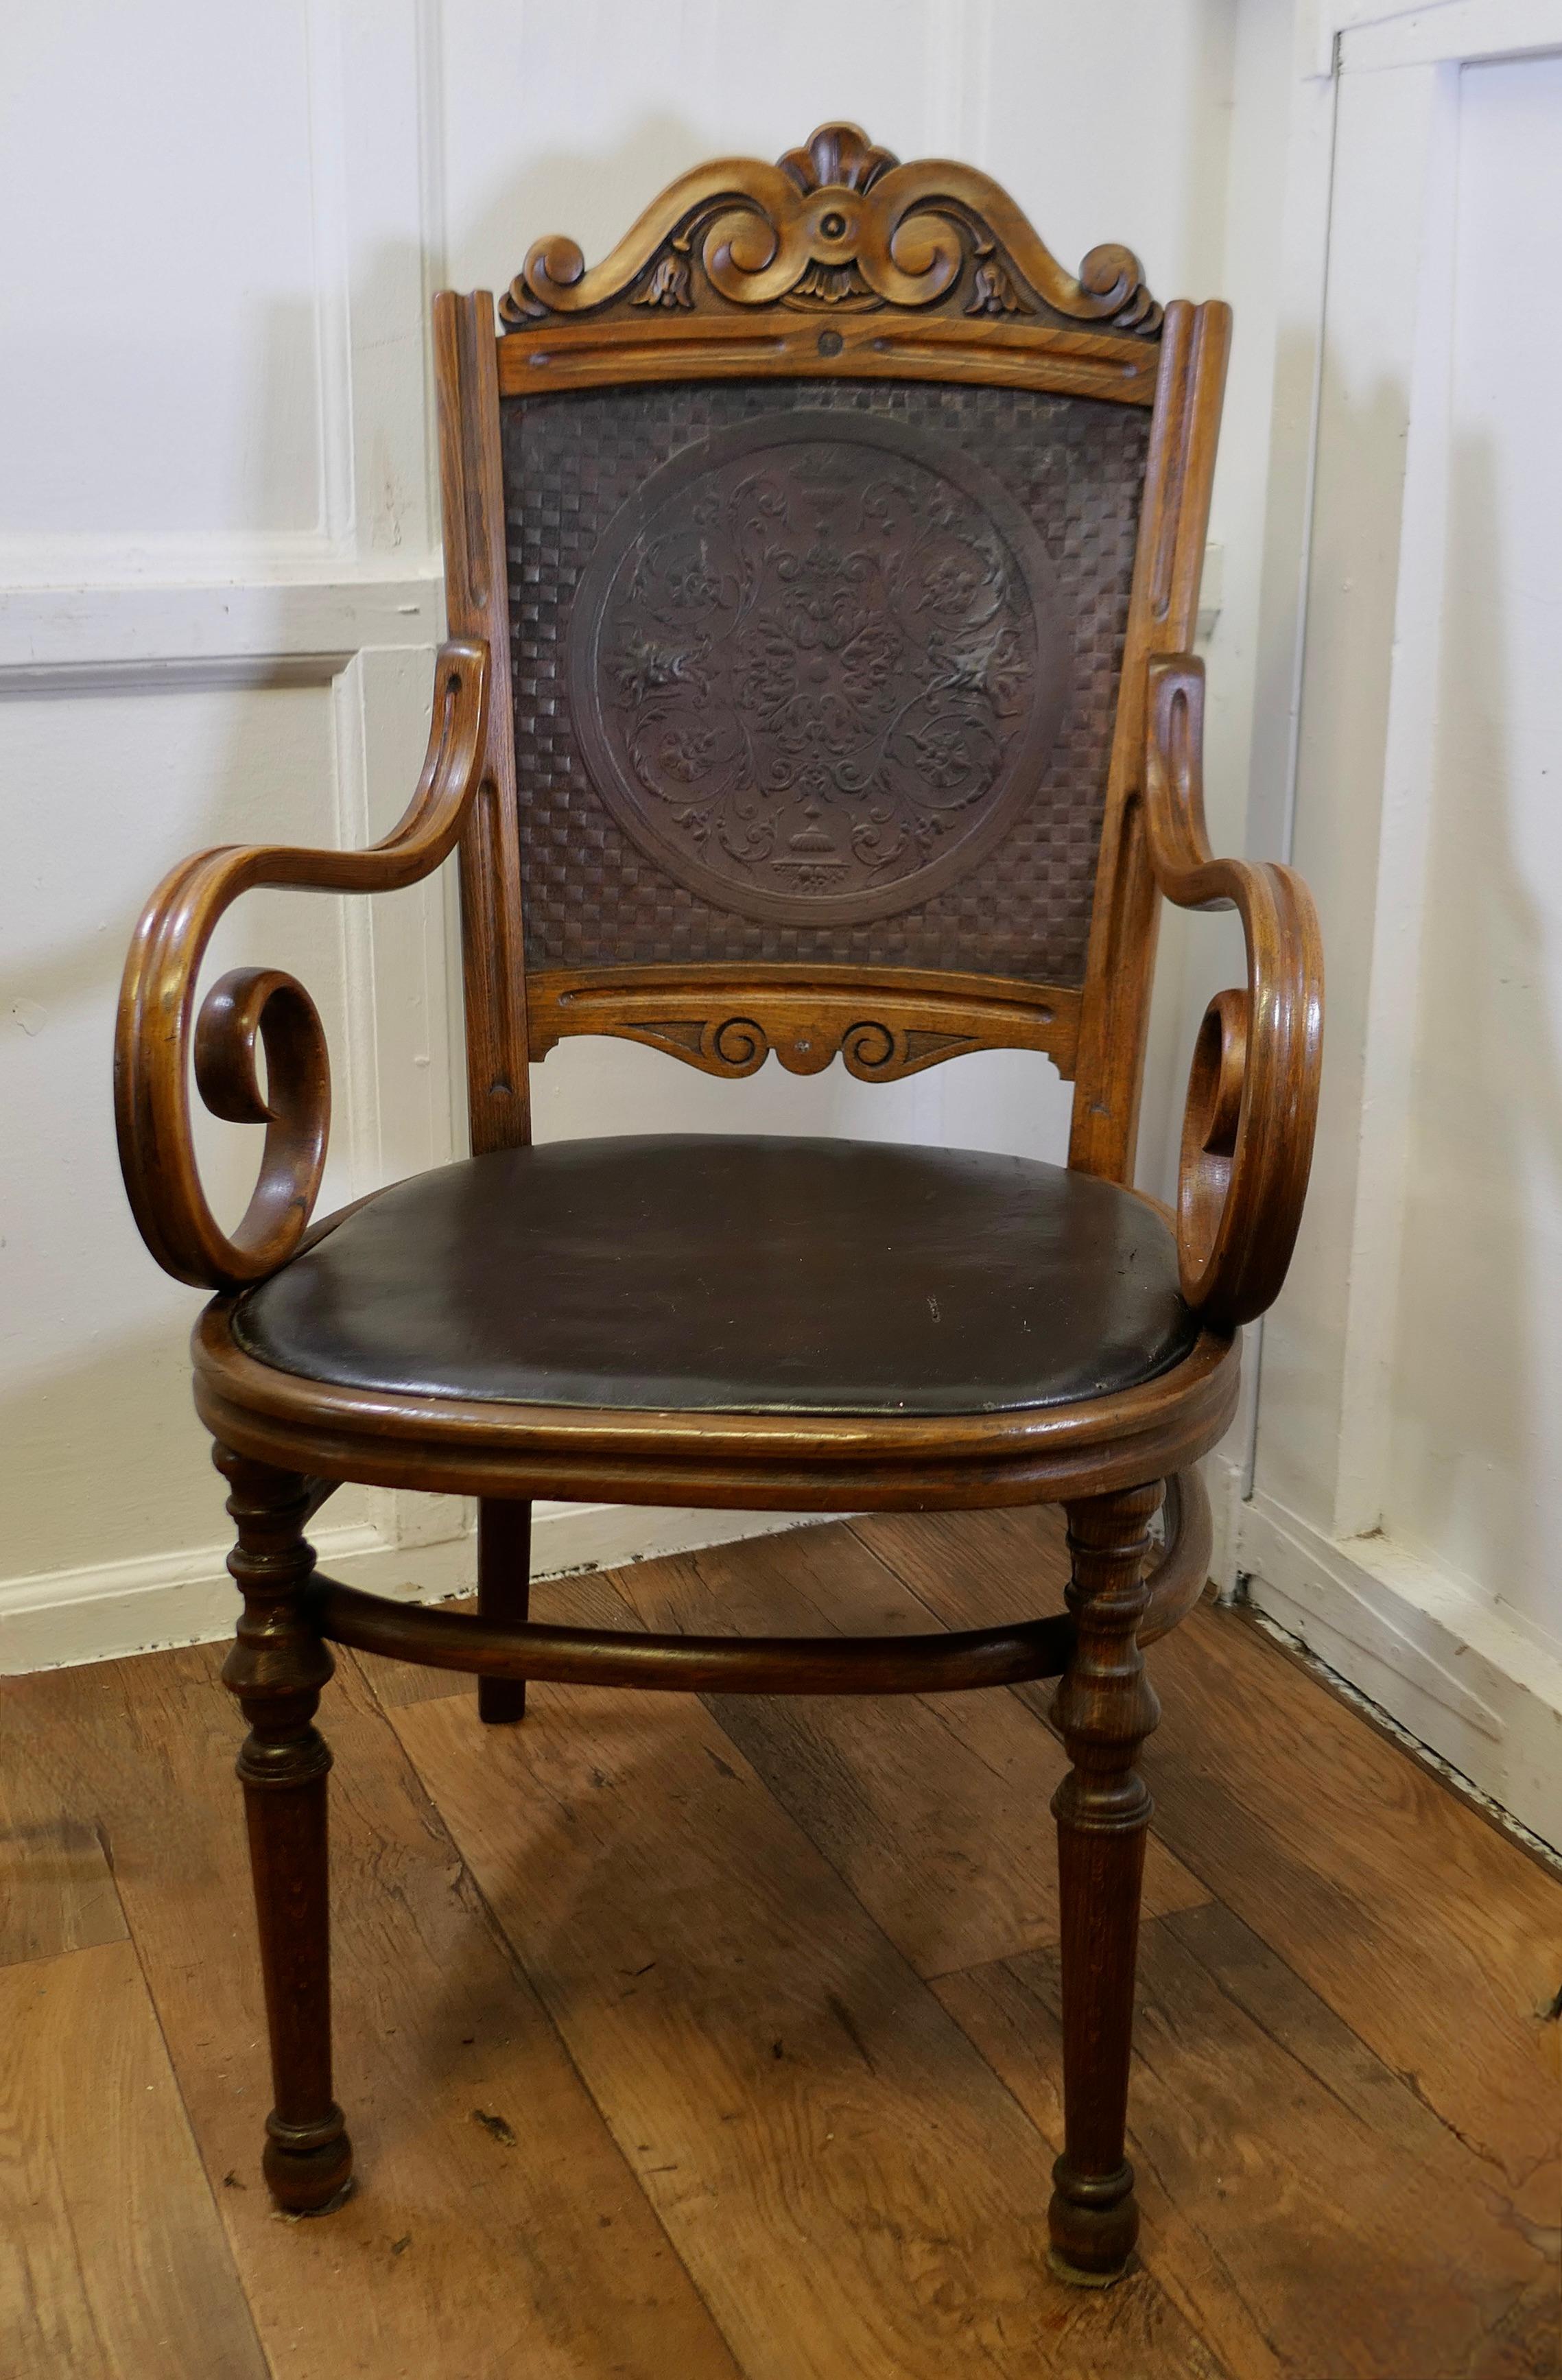 Victorian Upholstered Bentwood Salon or Desk Chair

This is a charming piece, the chair is made in the bent wood style with a carved top rail, spiral curved arms attractive turnings to the legs and leather upholstery, the back has decorative